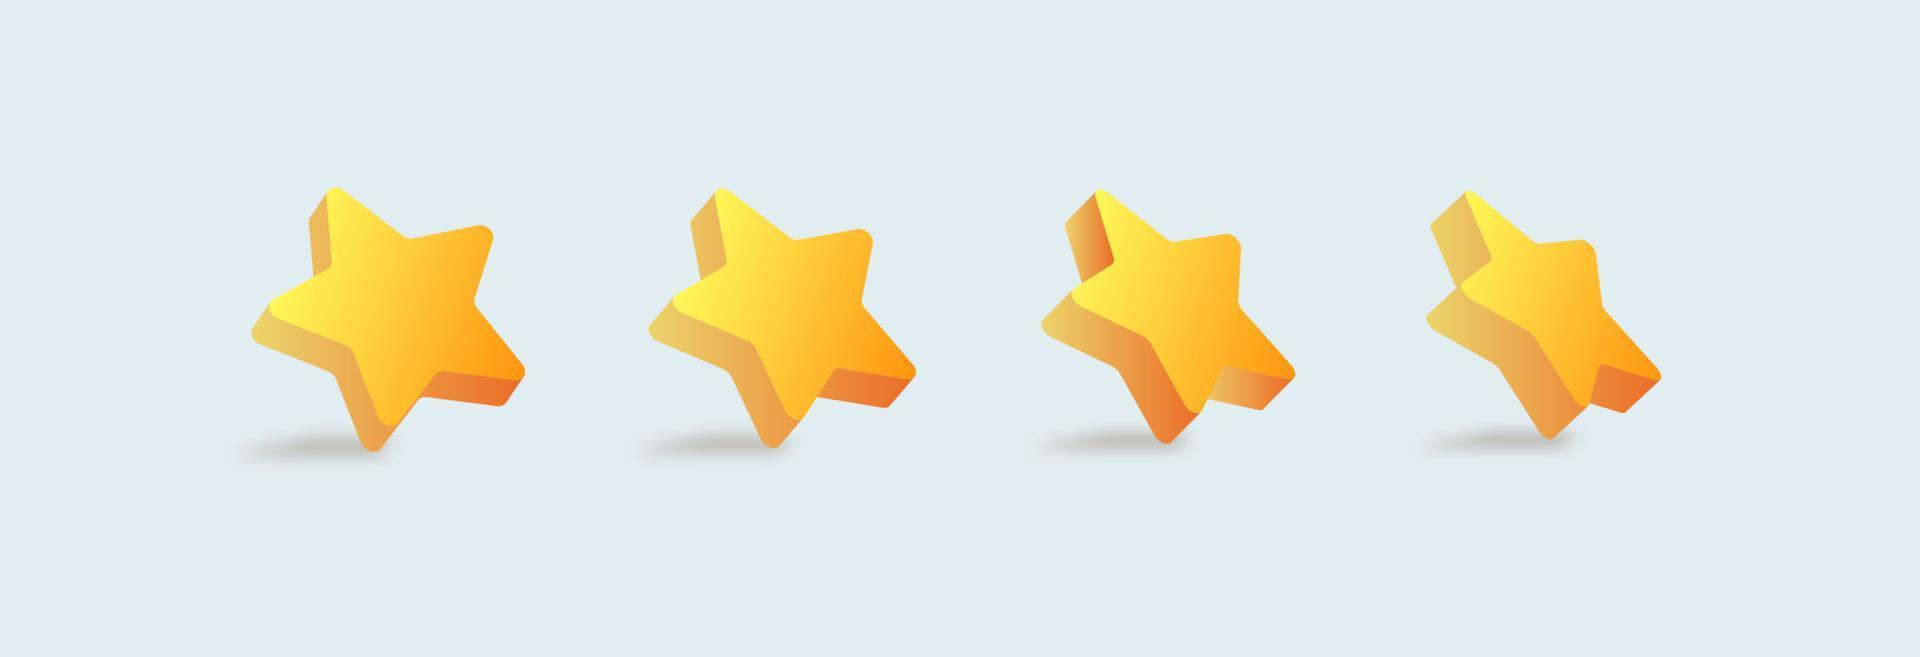 Rate us review concept in 3D style. Realistic stars in yellow colors isolated on white background. Review customer business concept. vector